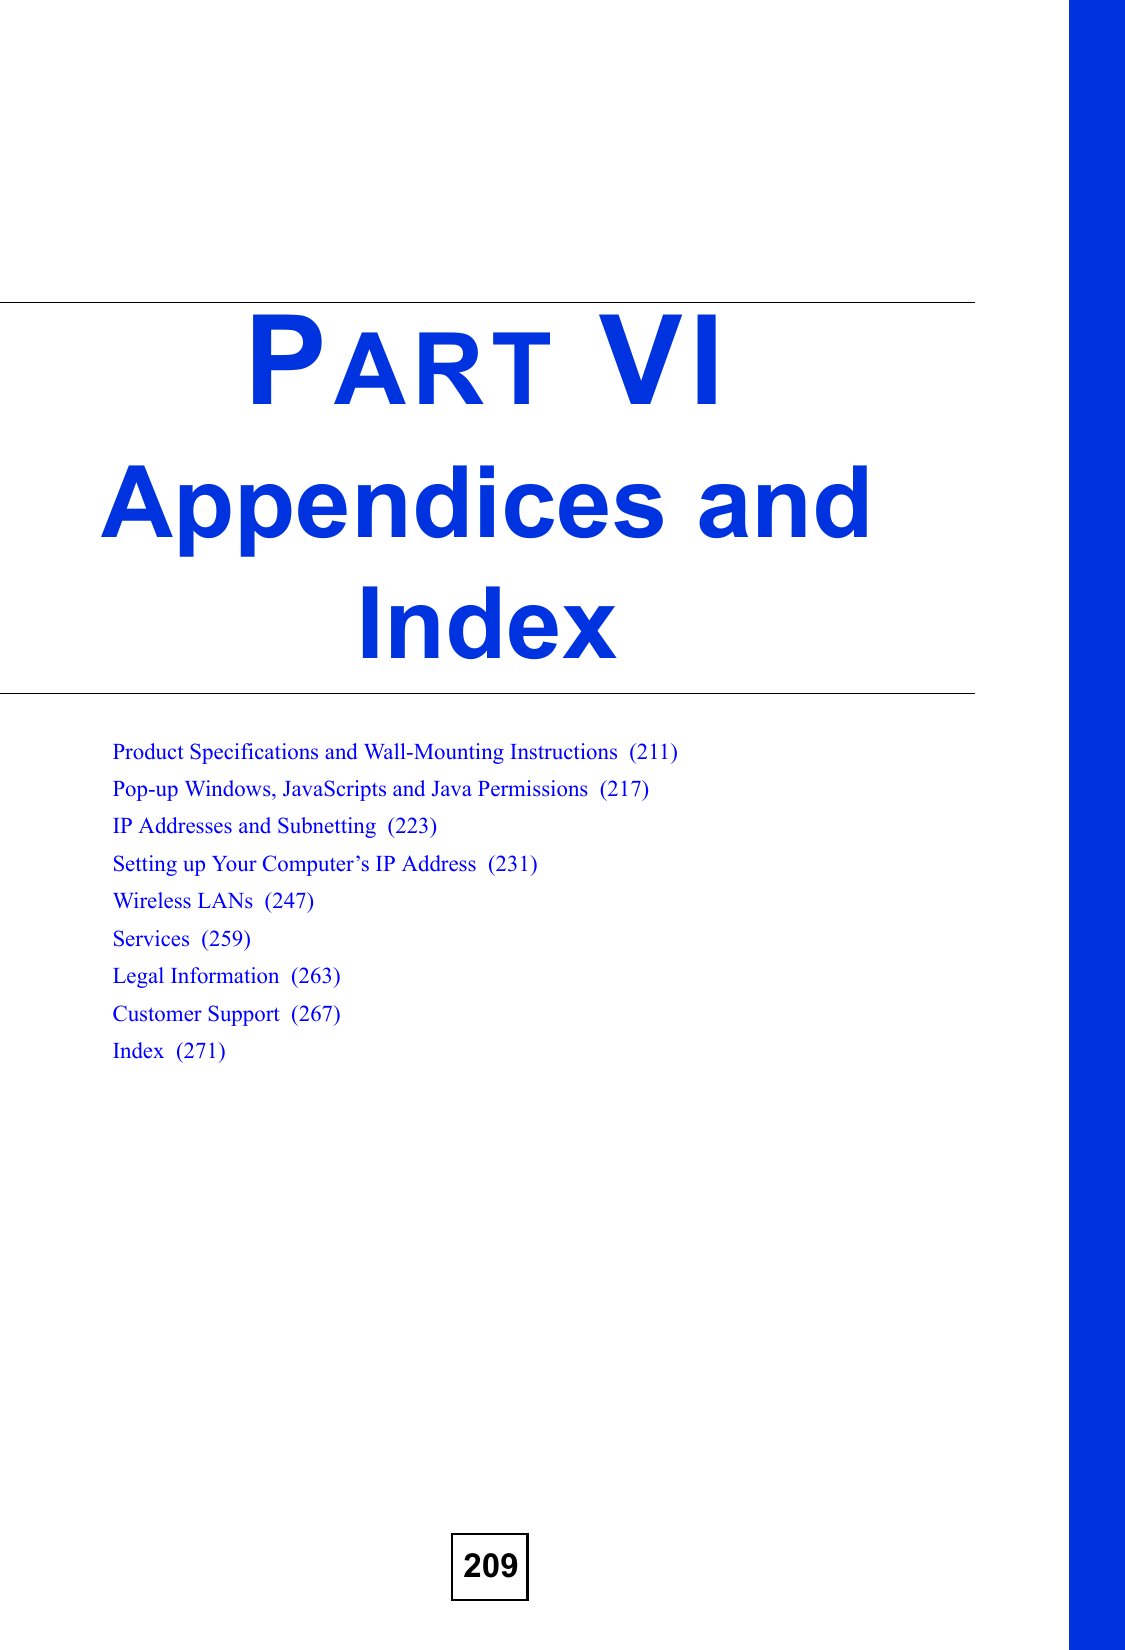 209PART VIAppendices and IndexProduct Specifications and Wall-Mounting Instructions  (211)Pop-up Windows, JavaScripts and Java Permissions  (217)IP Addresses and Subnetting  (223)Setting up Your Computer’s IP Address  (231)Wireless LANs  (247)Services  (259)Legal Information  (263)Customer Support  (267)Index  (271)